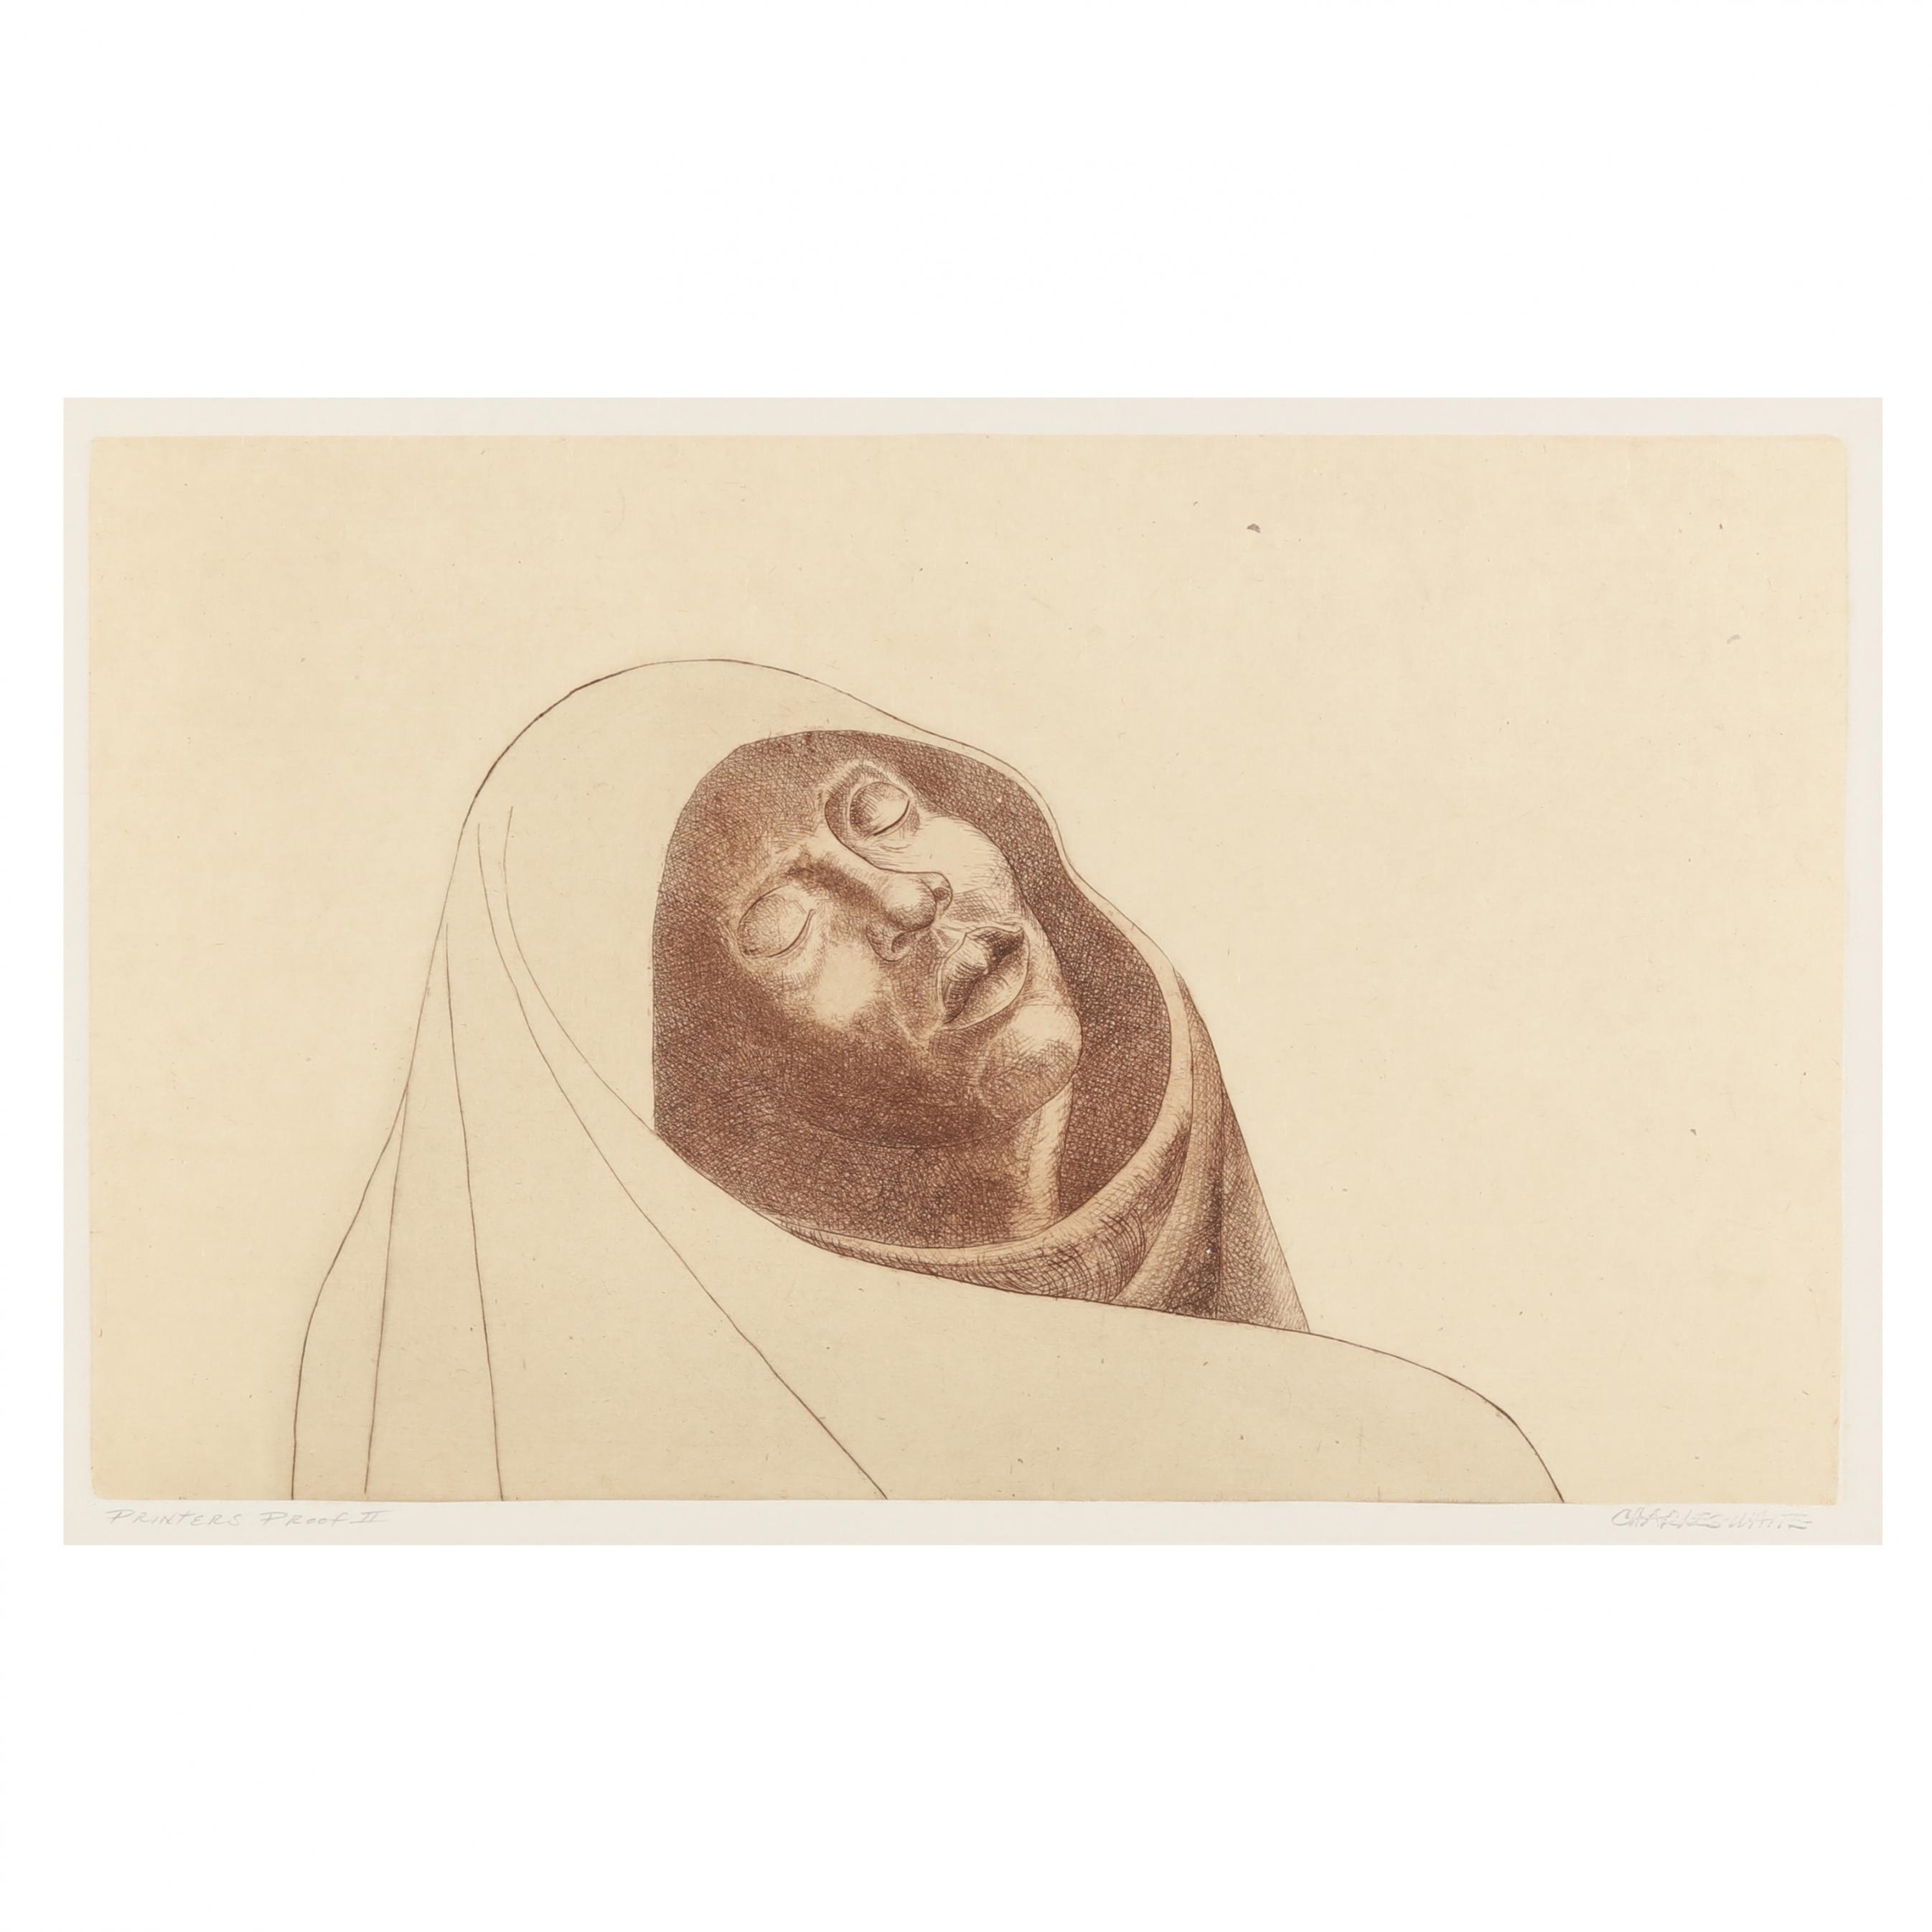 Artwork by Charles White, Madonna, Made of Etching in brown ink on chine collé